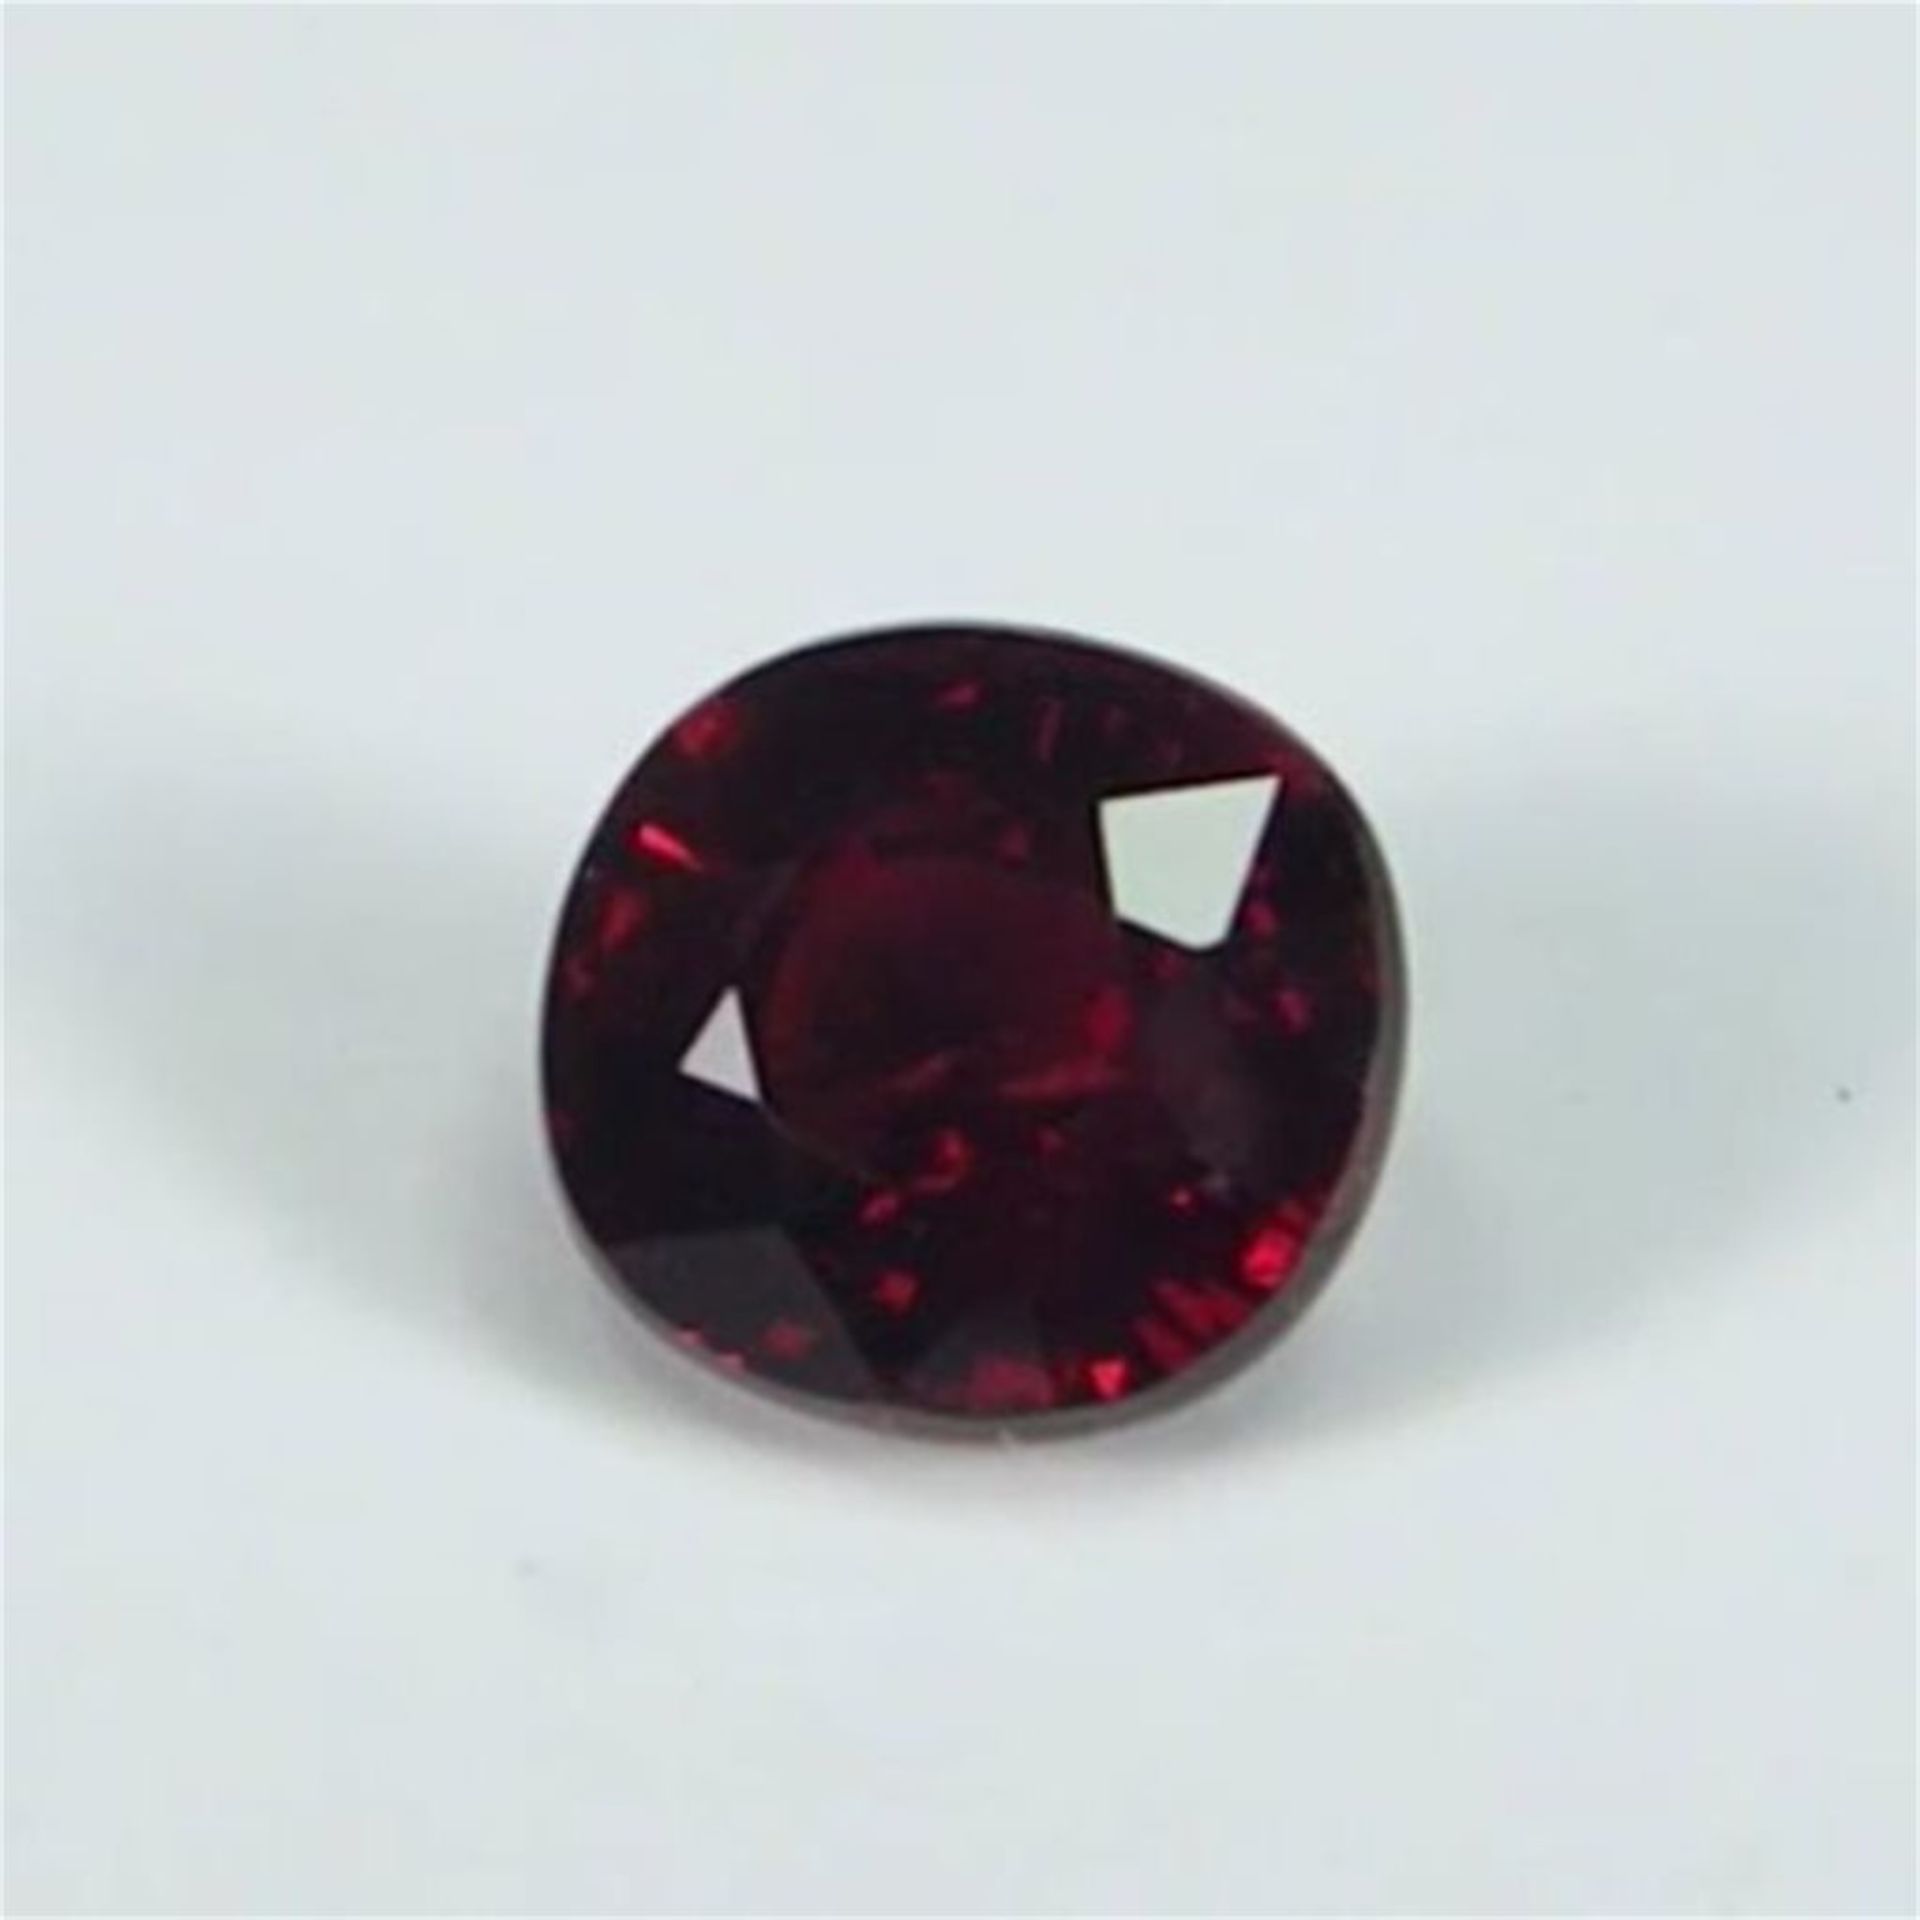 GIA Certified 1.09 ct. Untreated Pigeon’s Blood Ruby - BURMA - Image 7 of 10